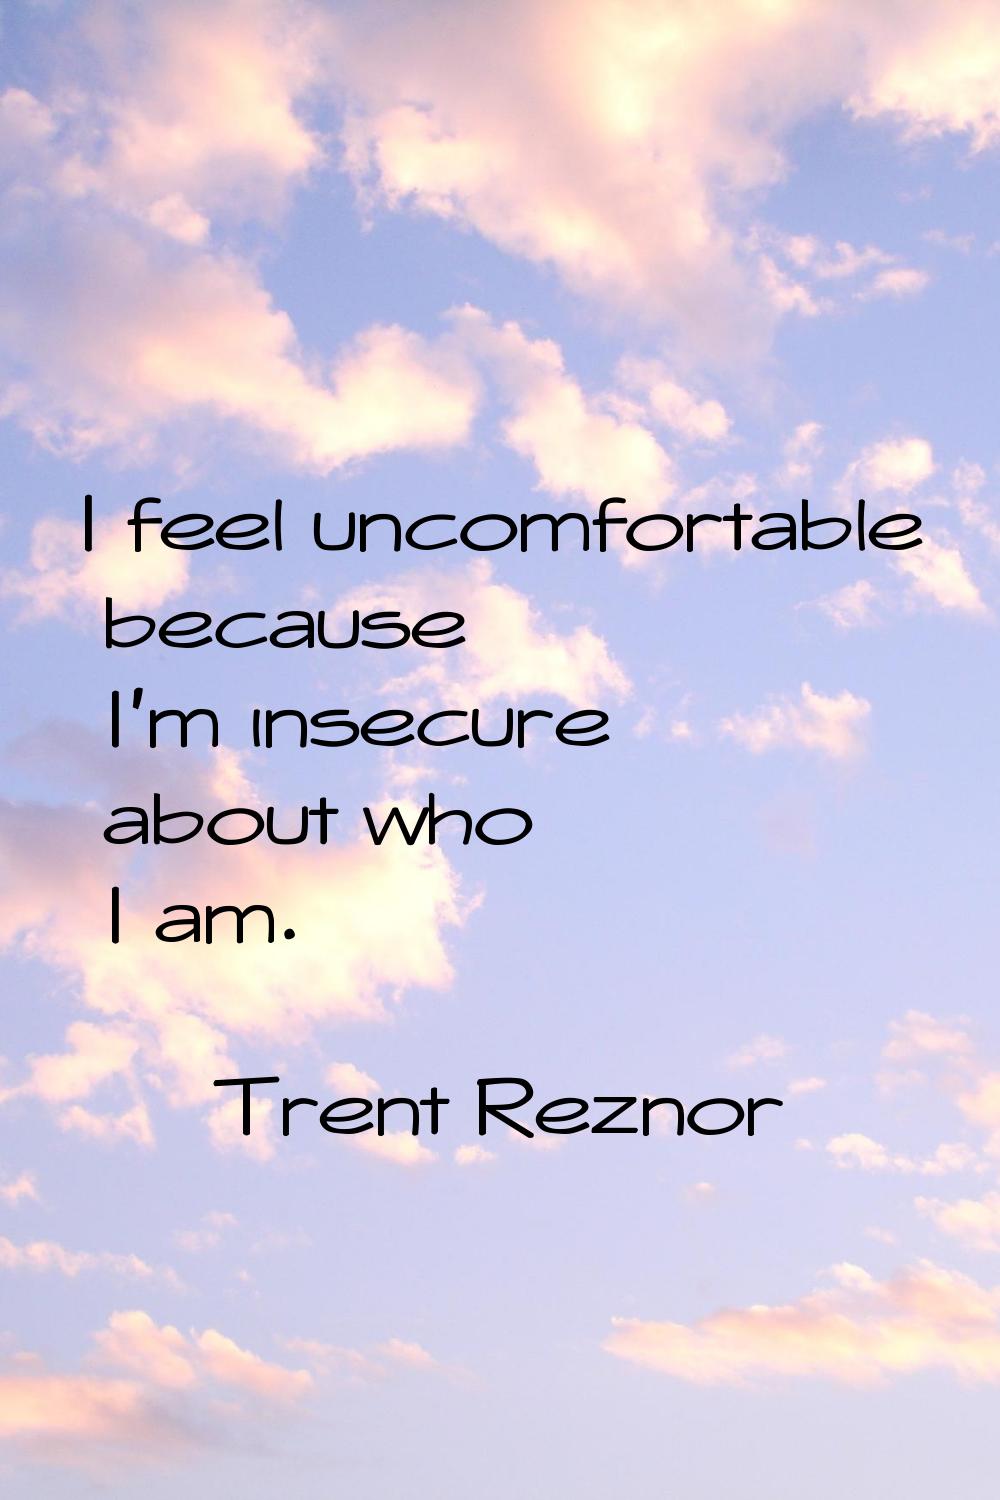 I feel uncomfortable because I'm insecure about who I am.